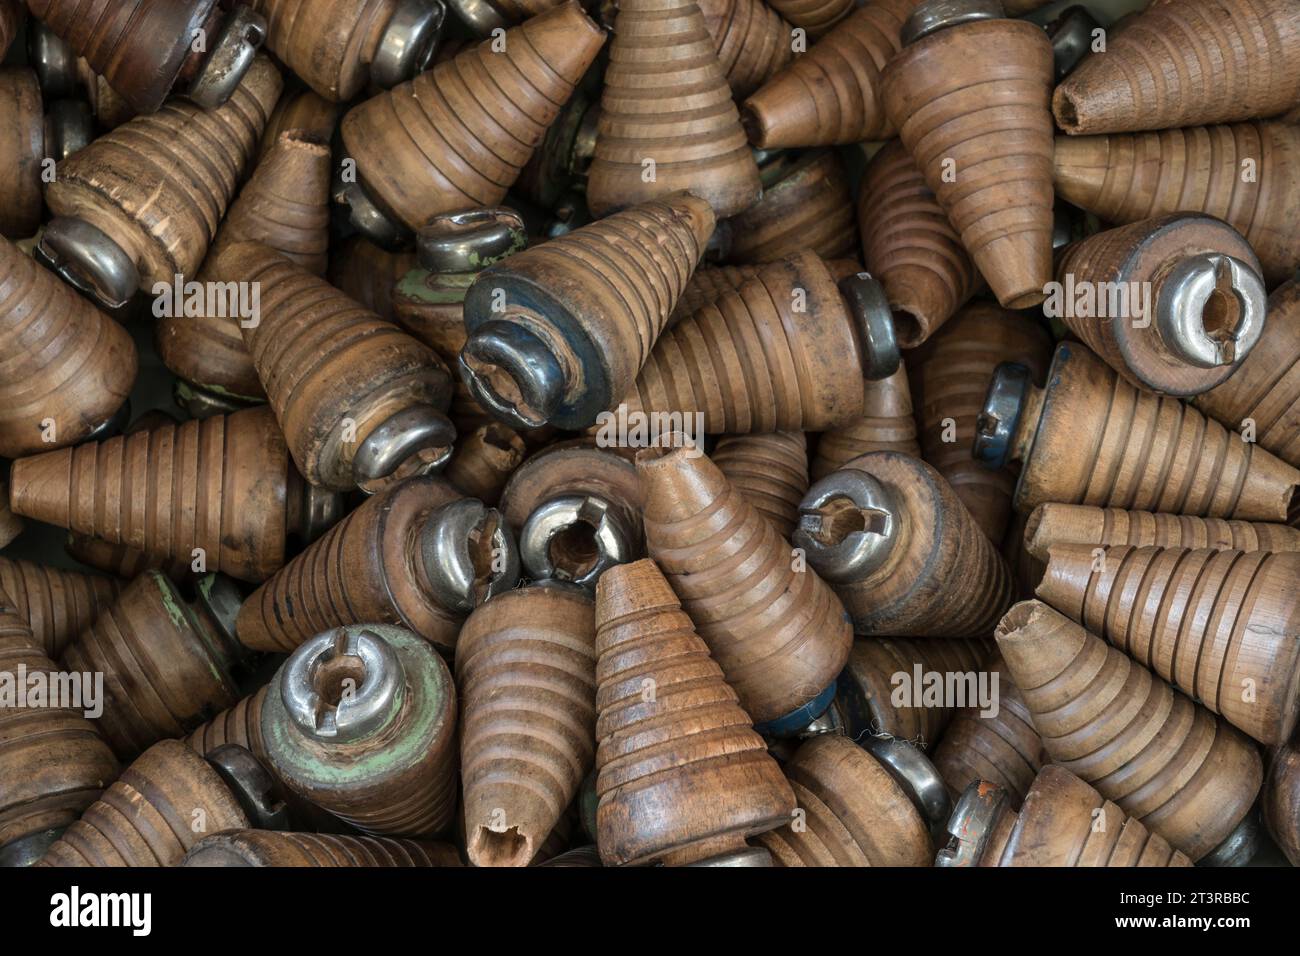 thread spools for weaving in an old textile mill Stock Photo